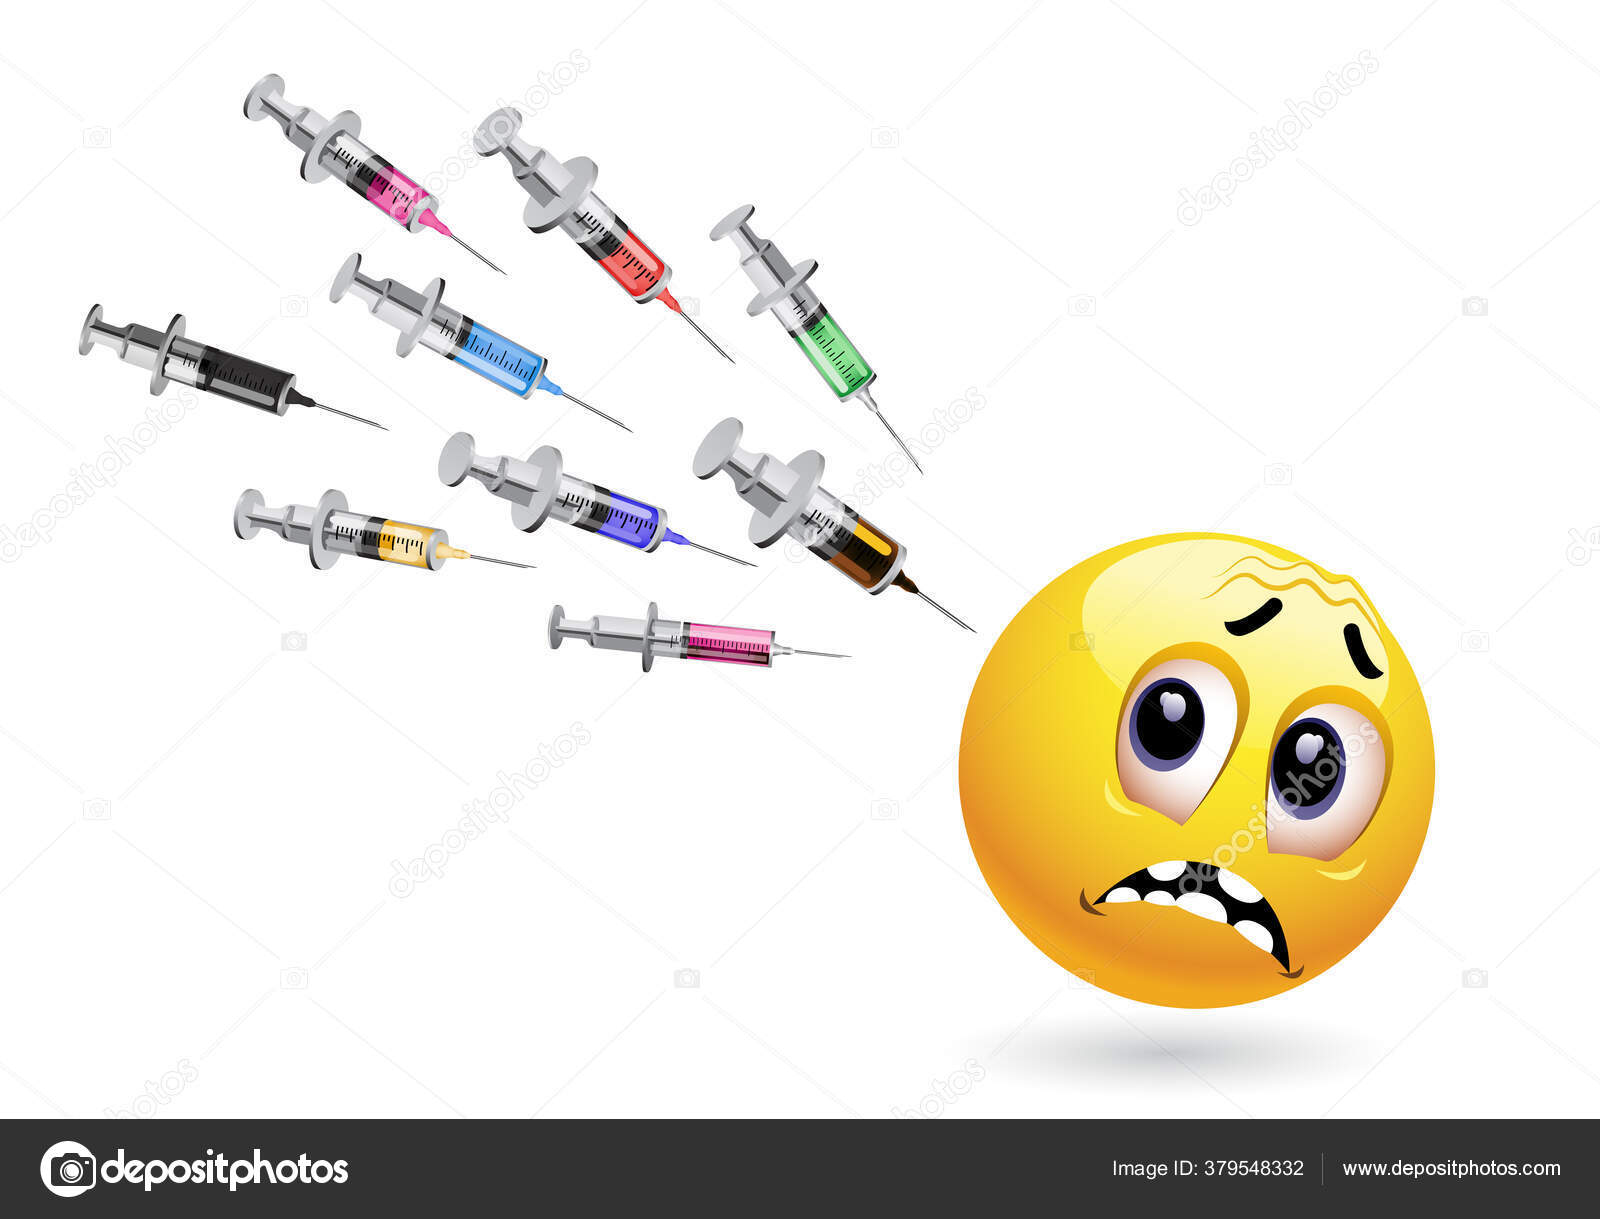 depositphotos_379548332-stock-illustration-smiley-ball-looking-injection-scared.jpg